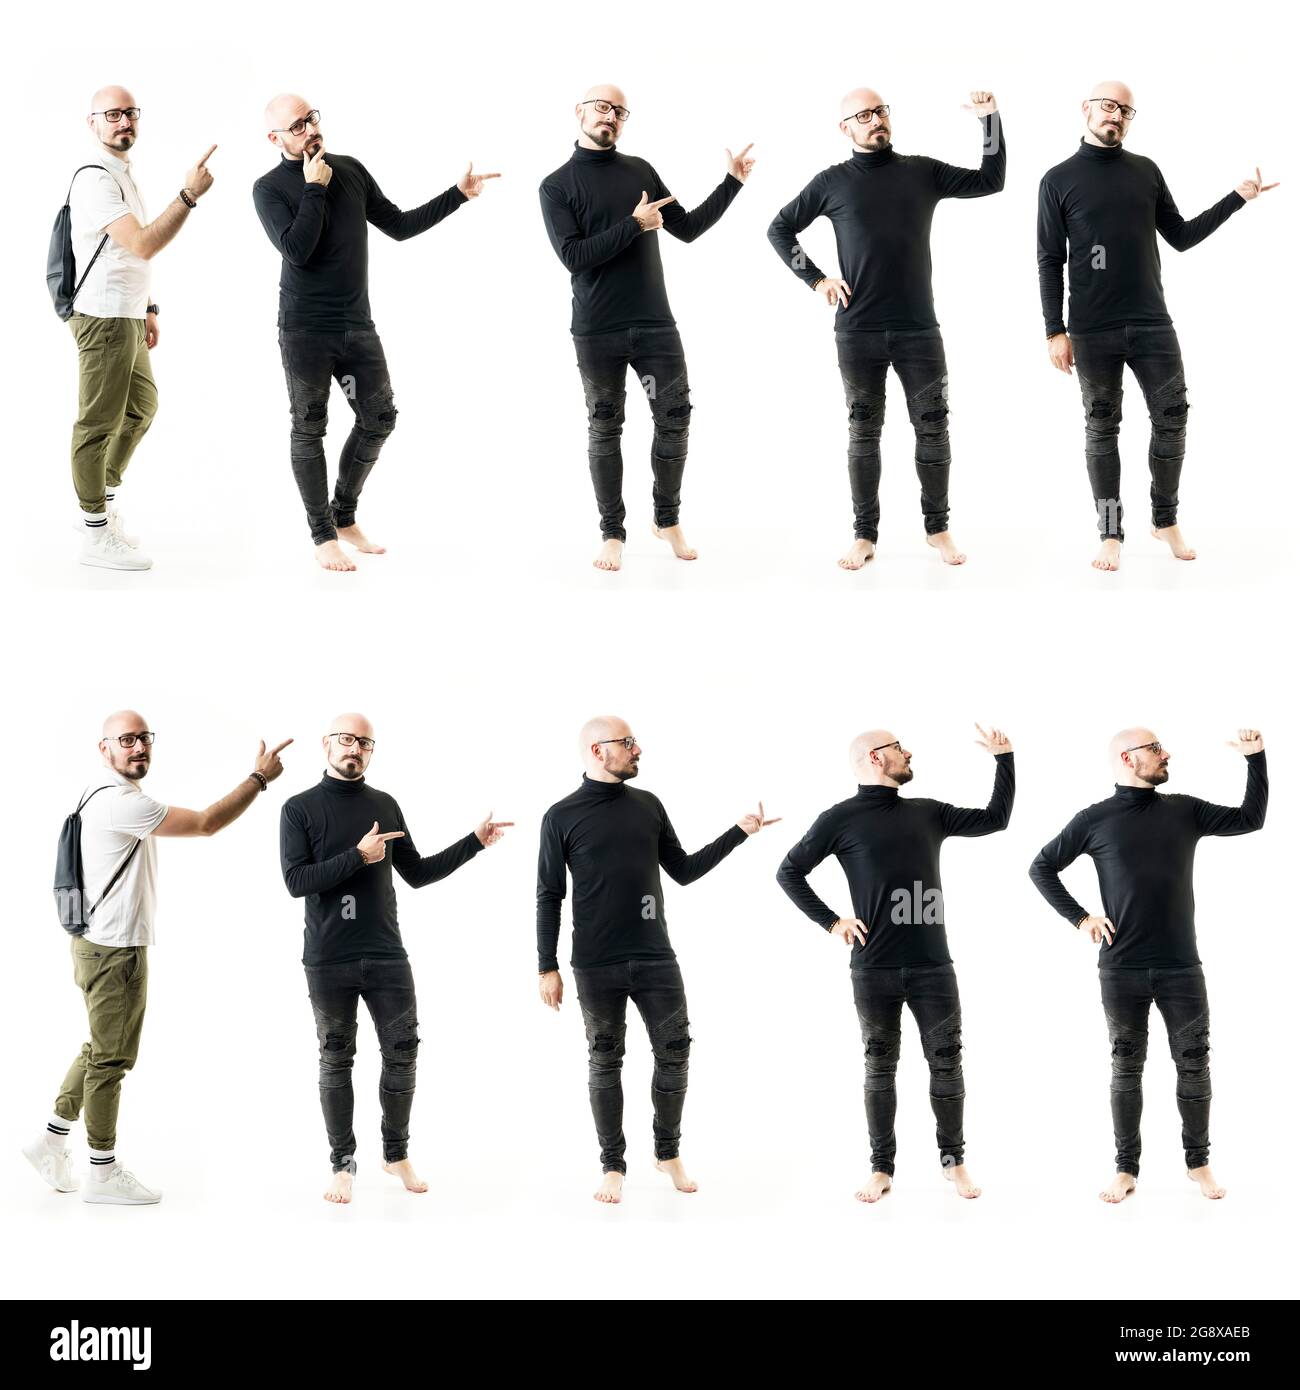 Collage of bald bearded edgy unconventional style people pointing and marketing gestures. Full body people isolated on white background Stock Photo